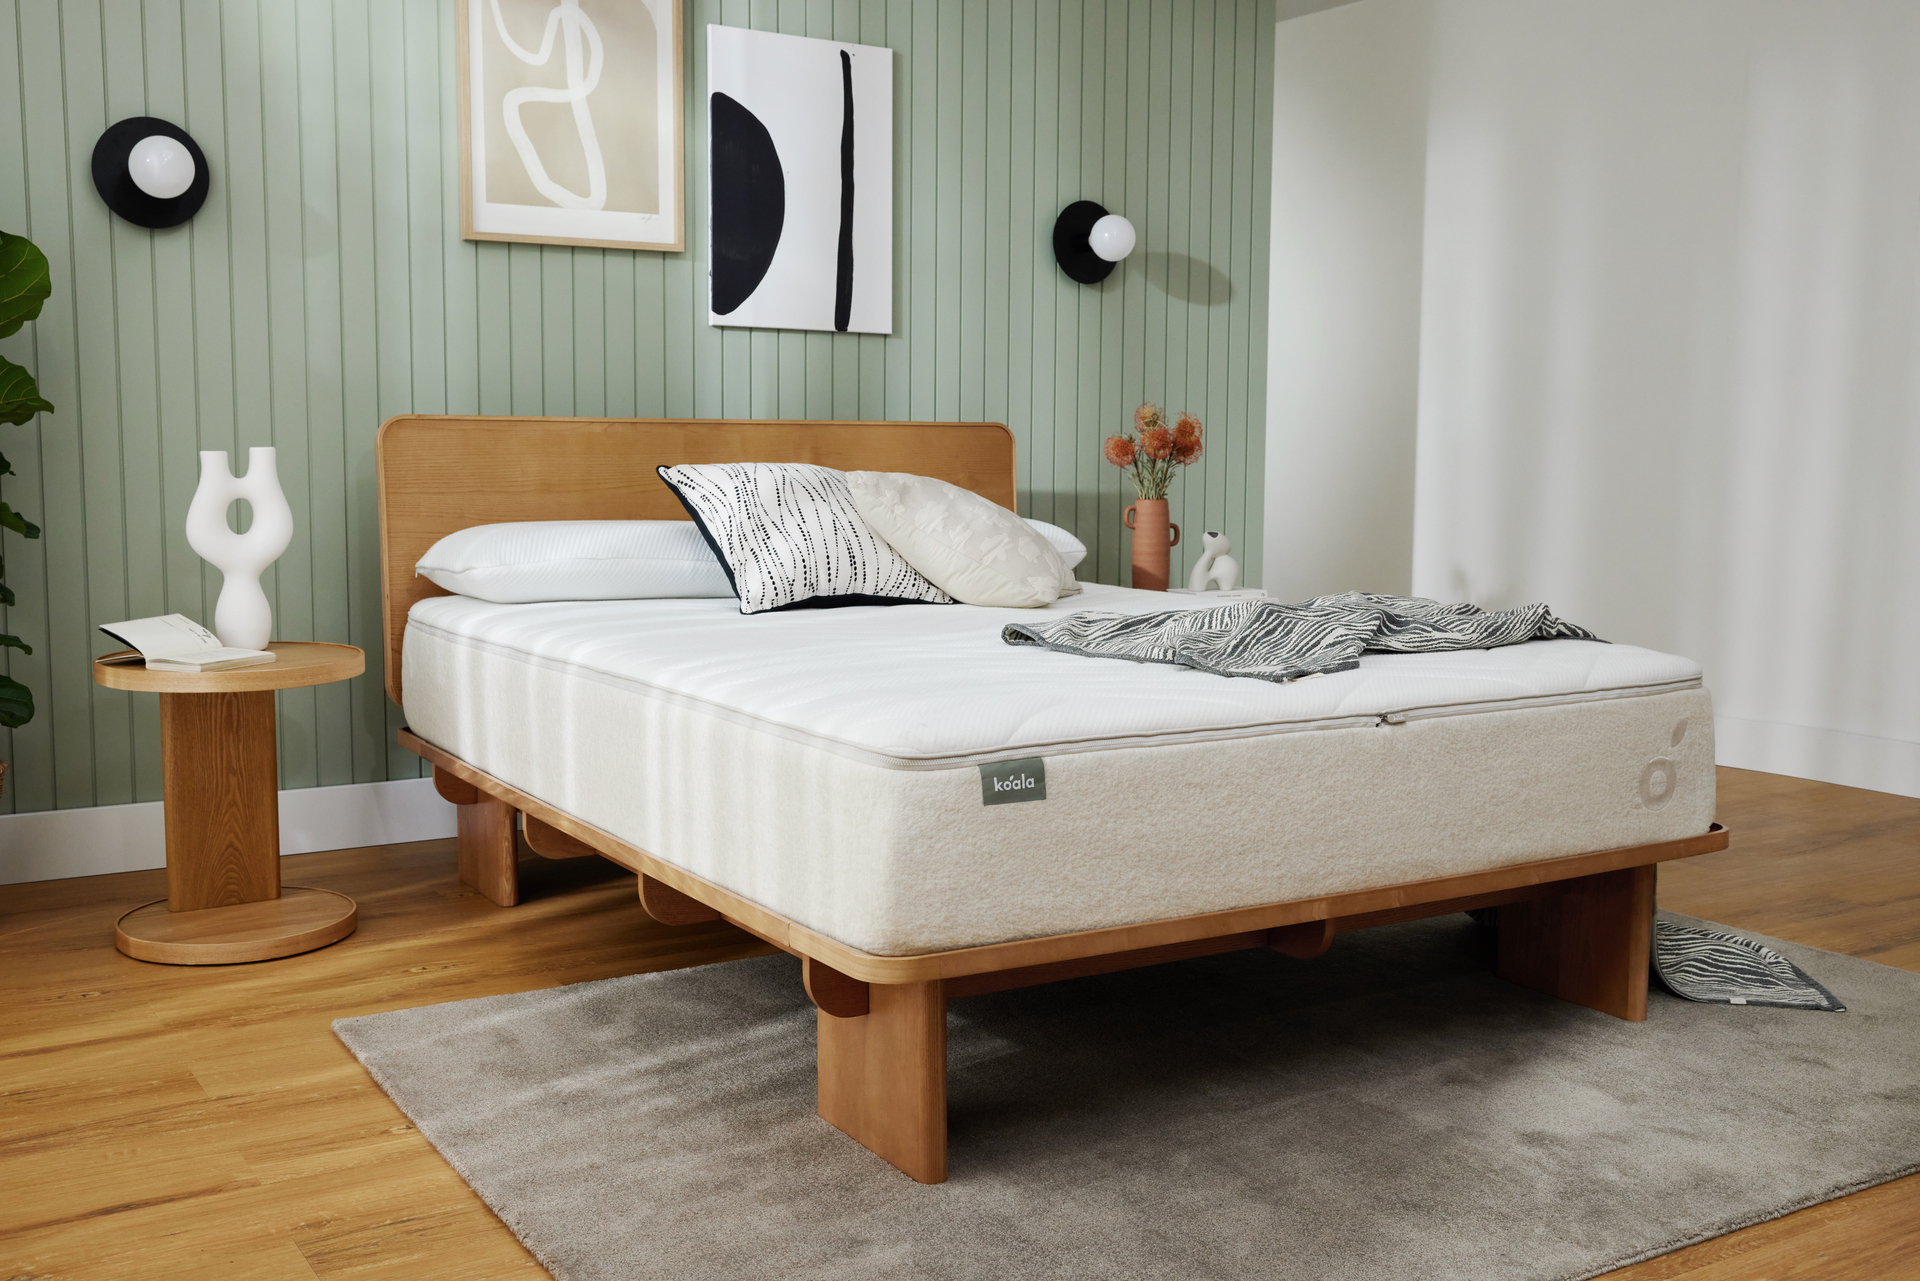 A Koala bed base and mattress in a large bedroom with green feature wall and timber flooring